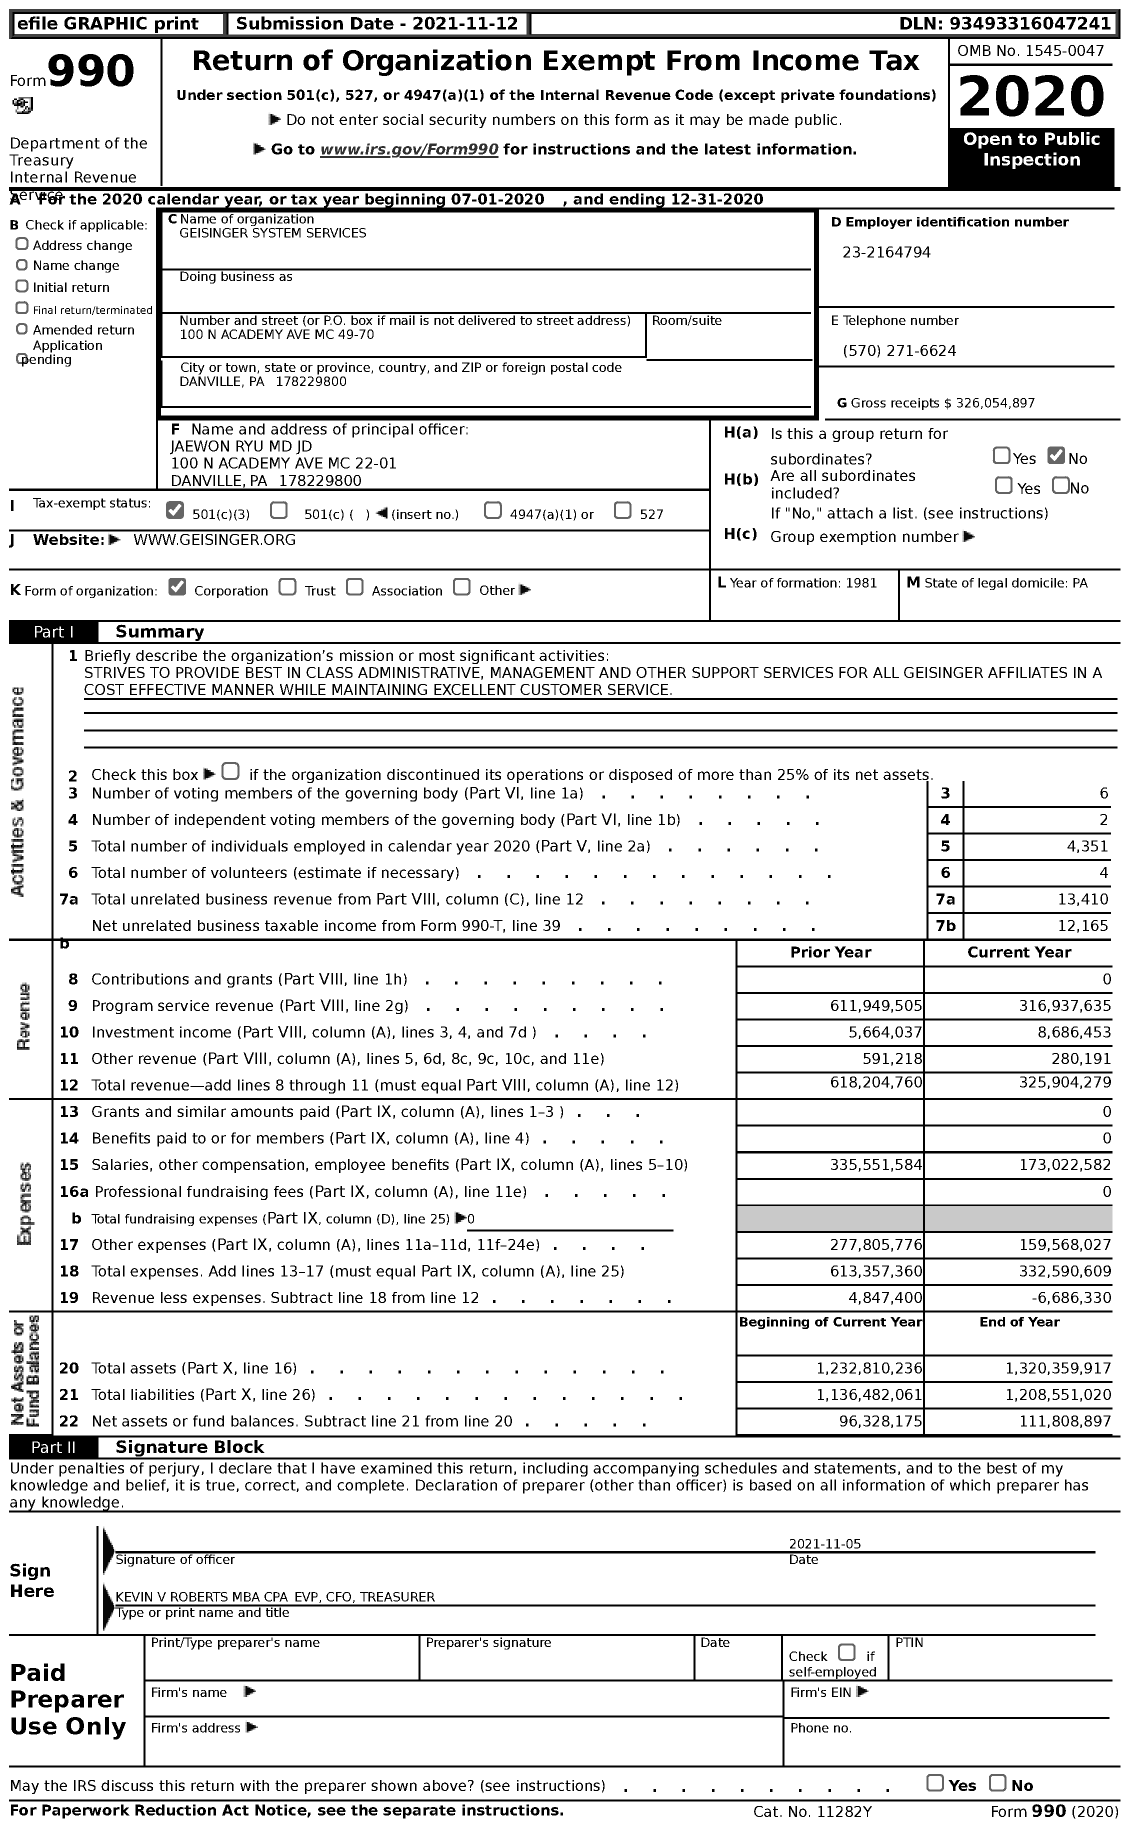 Image of first page of 2020 Form 990 for Geisinger System Services (GHS)